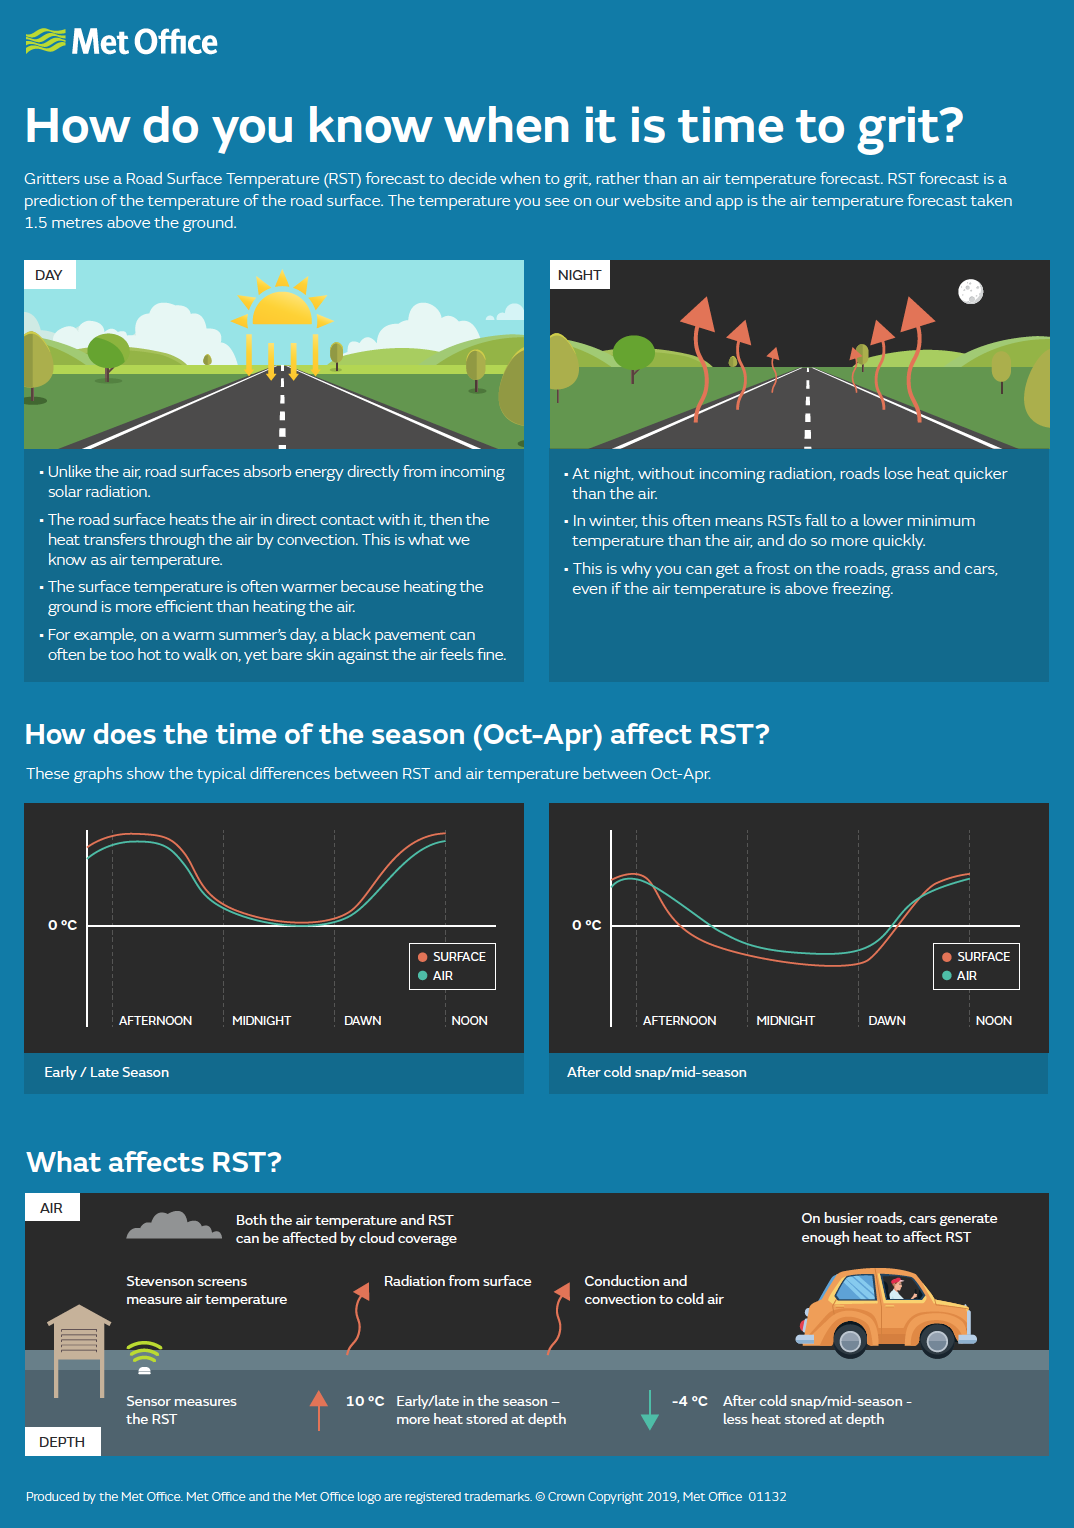 Met Office 'How do you know when it is time to grit?' infographic.